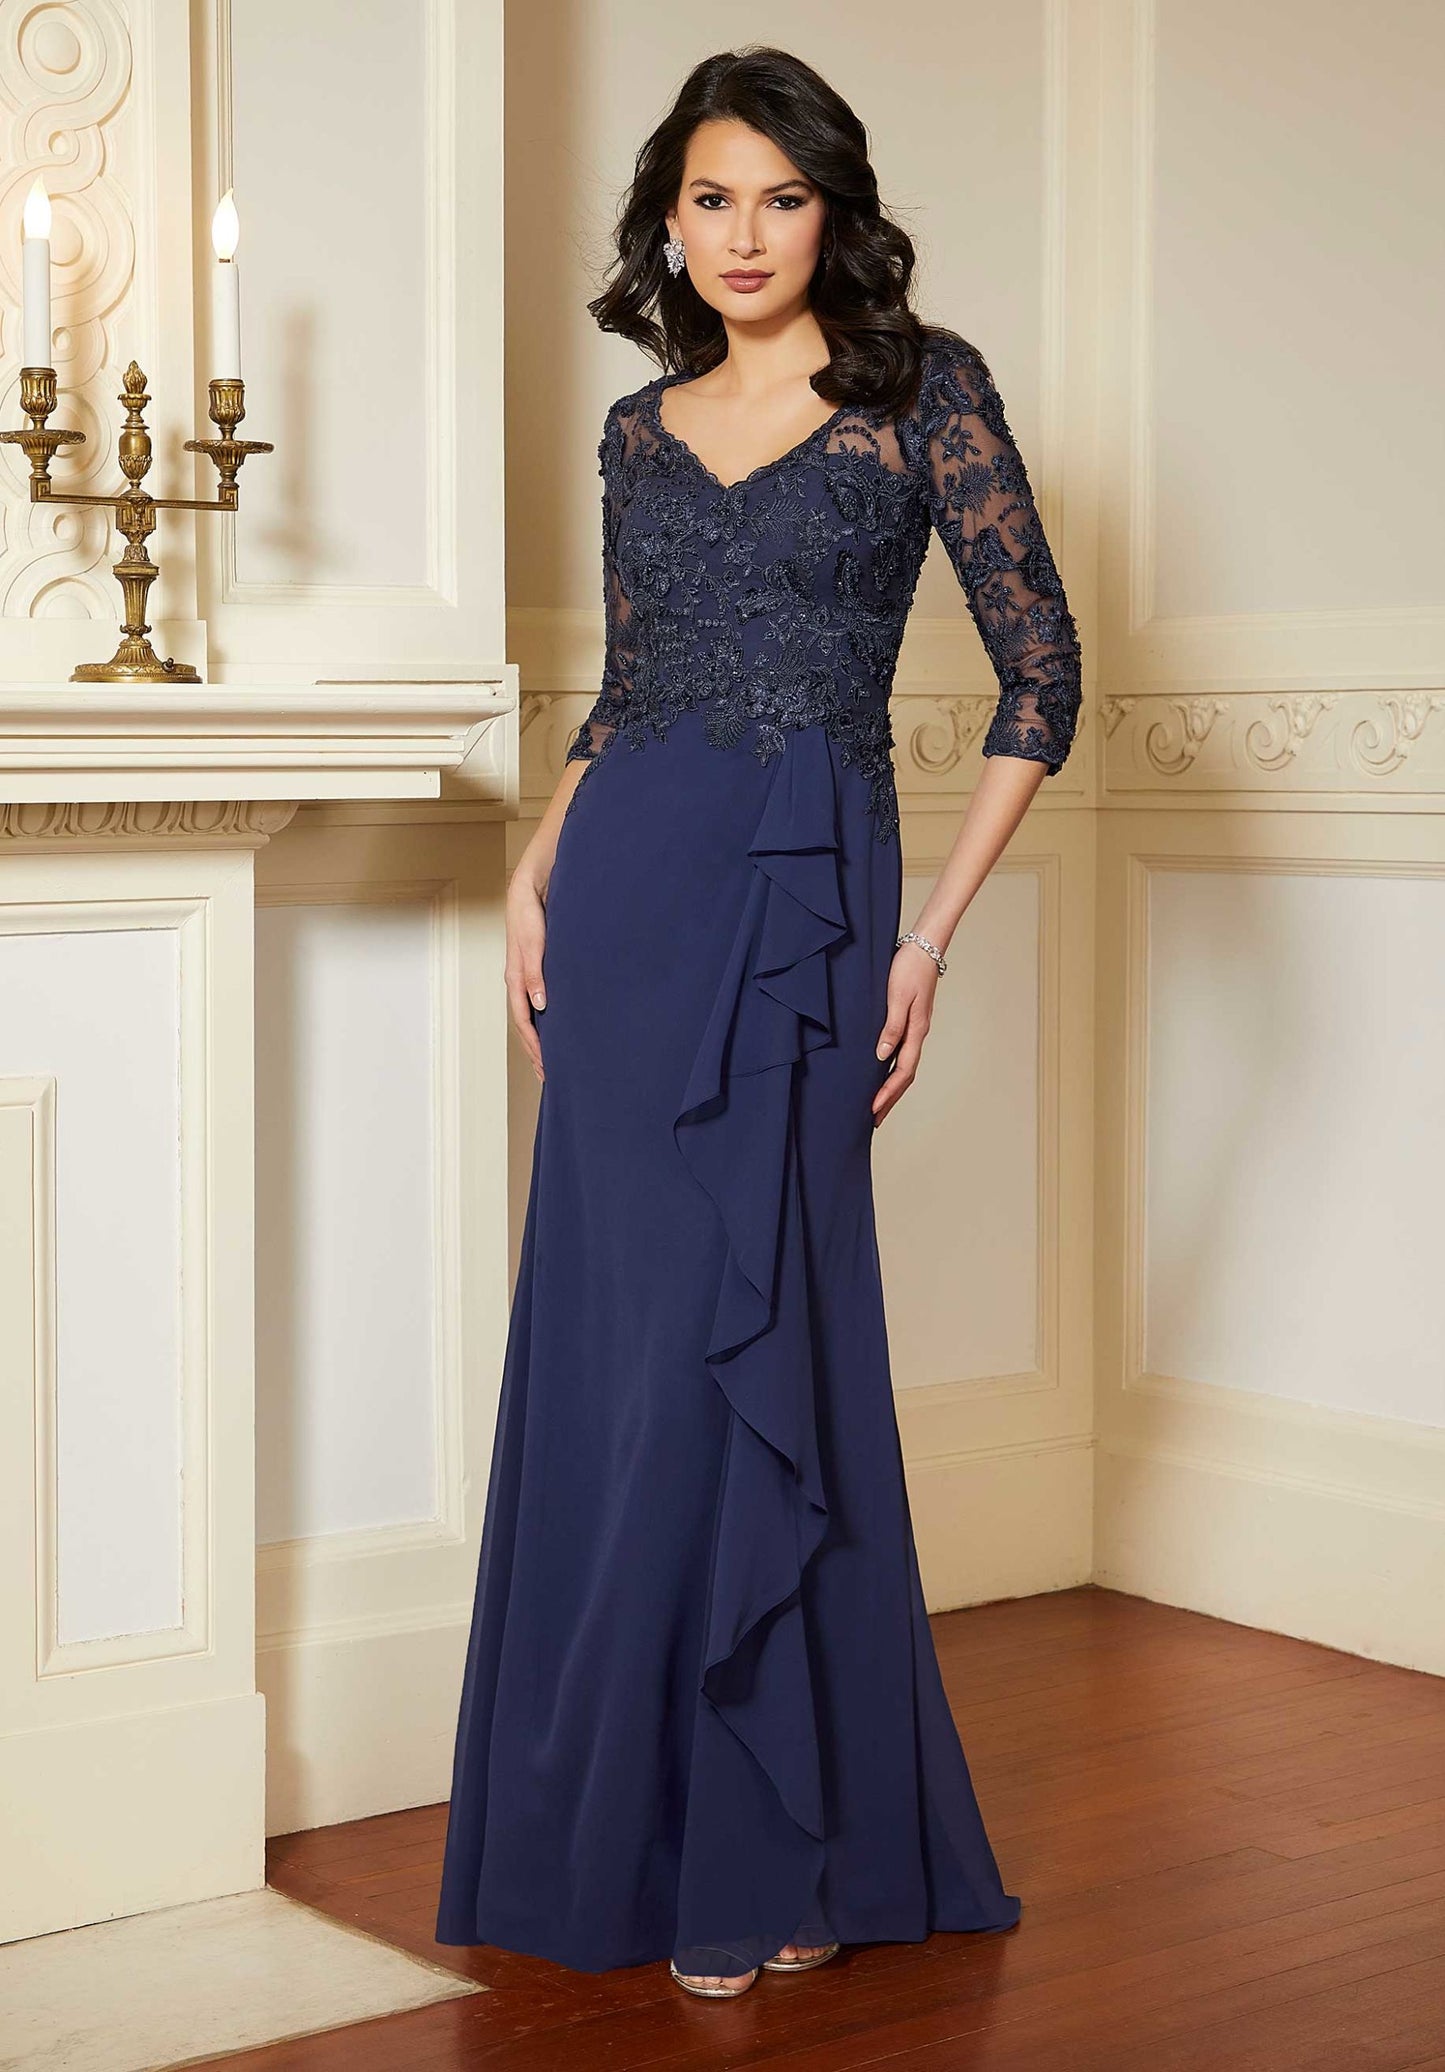 Three-dimensional Lace Evening Gown Morilee